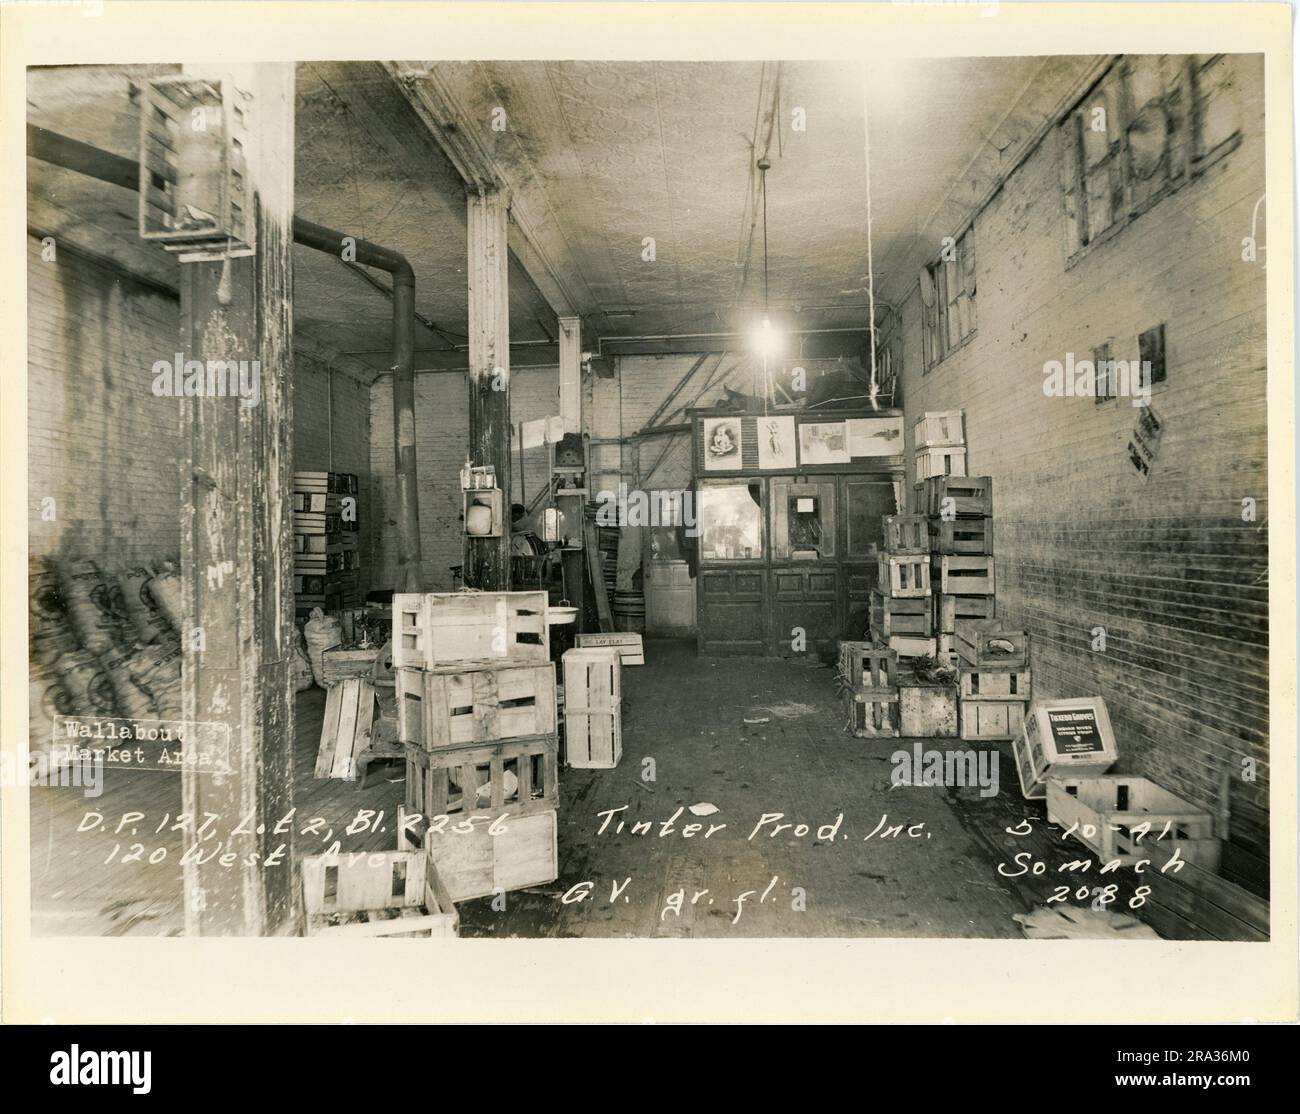 Photograph of interior of lot 2, Bl. 2256, 120 West Ave, ground floor of Tinter Prod Inc, D.P. 127. Stock Photo